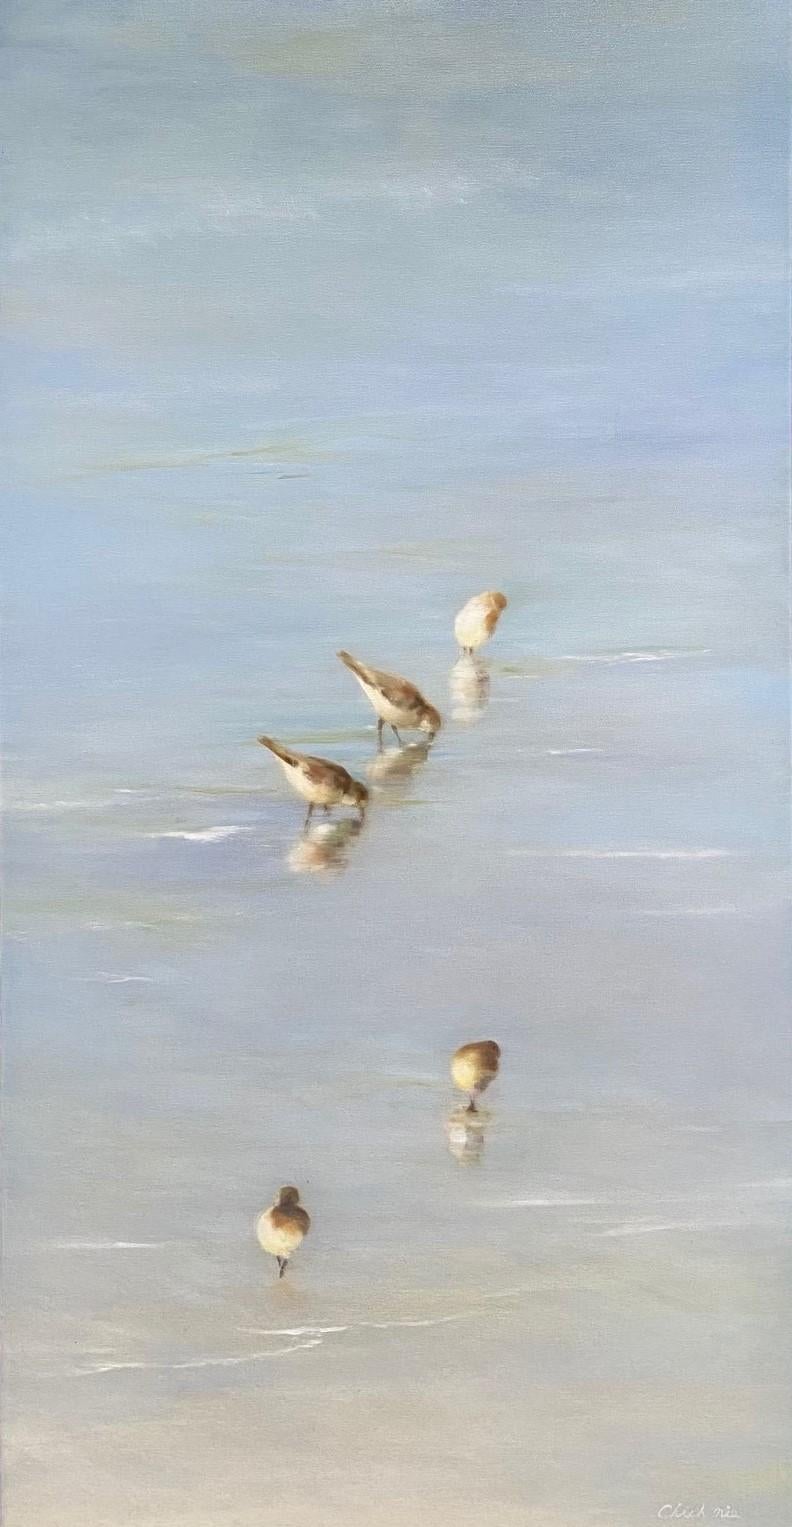 Reflections, original 48x24 contemporary marine landscape - Painting by Chieh-Nie-Cherng